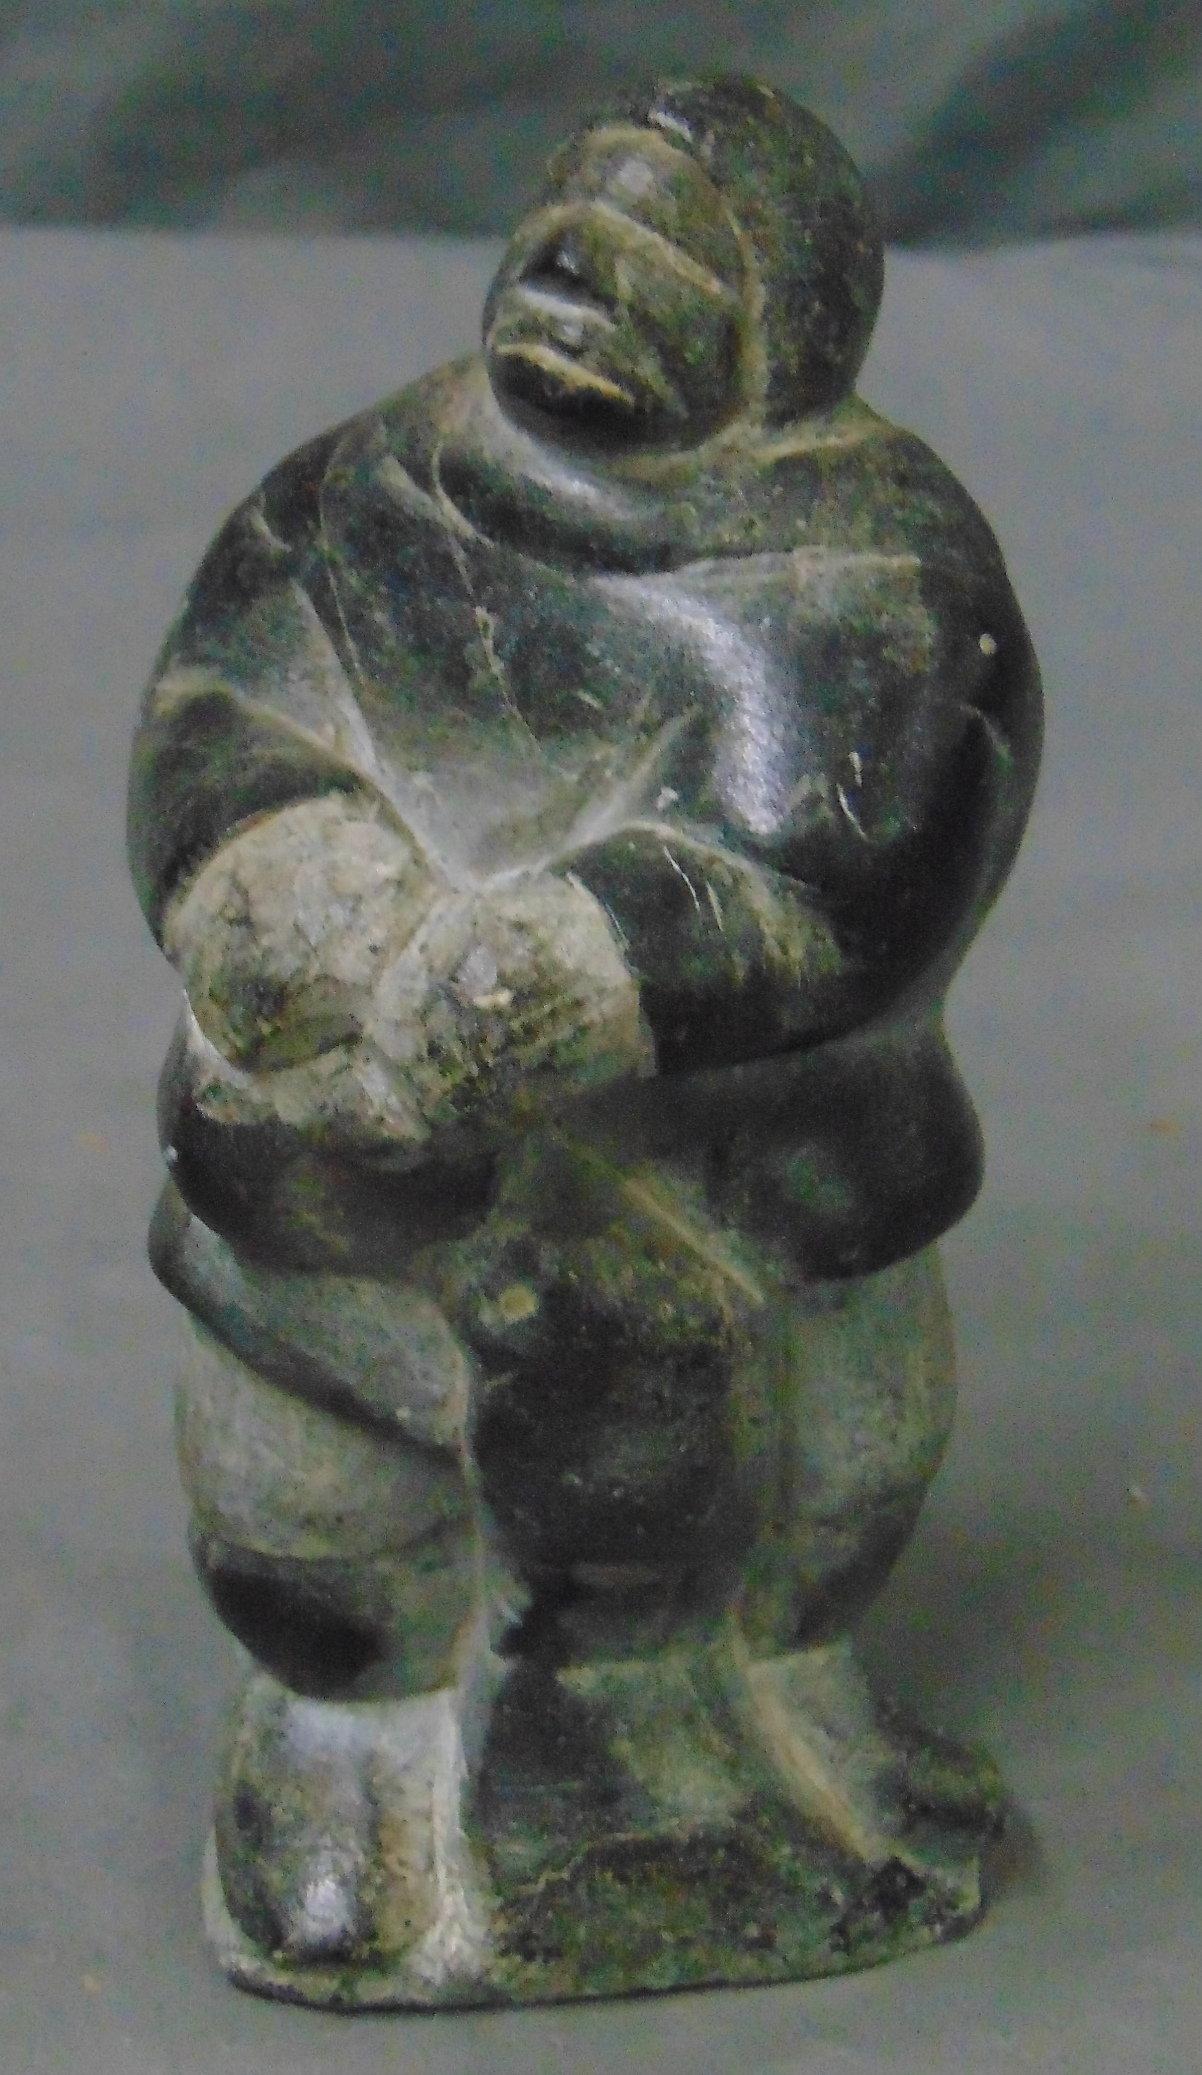 (3) Small Canadian Inuit Sculptures